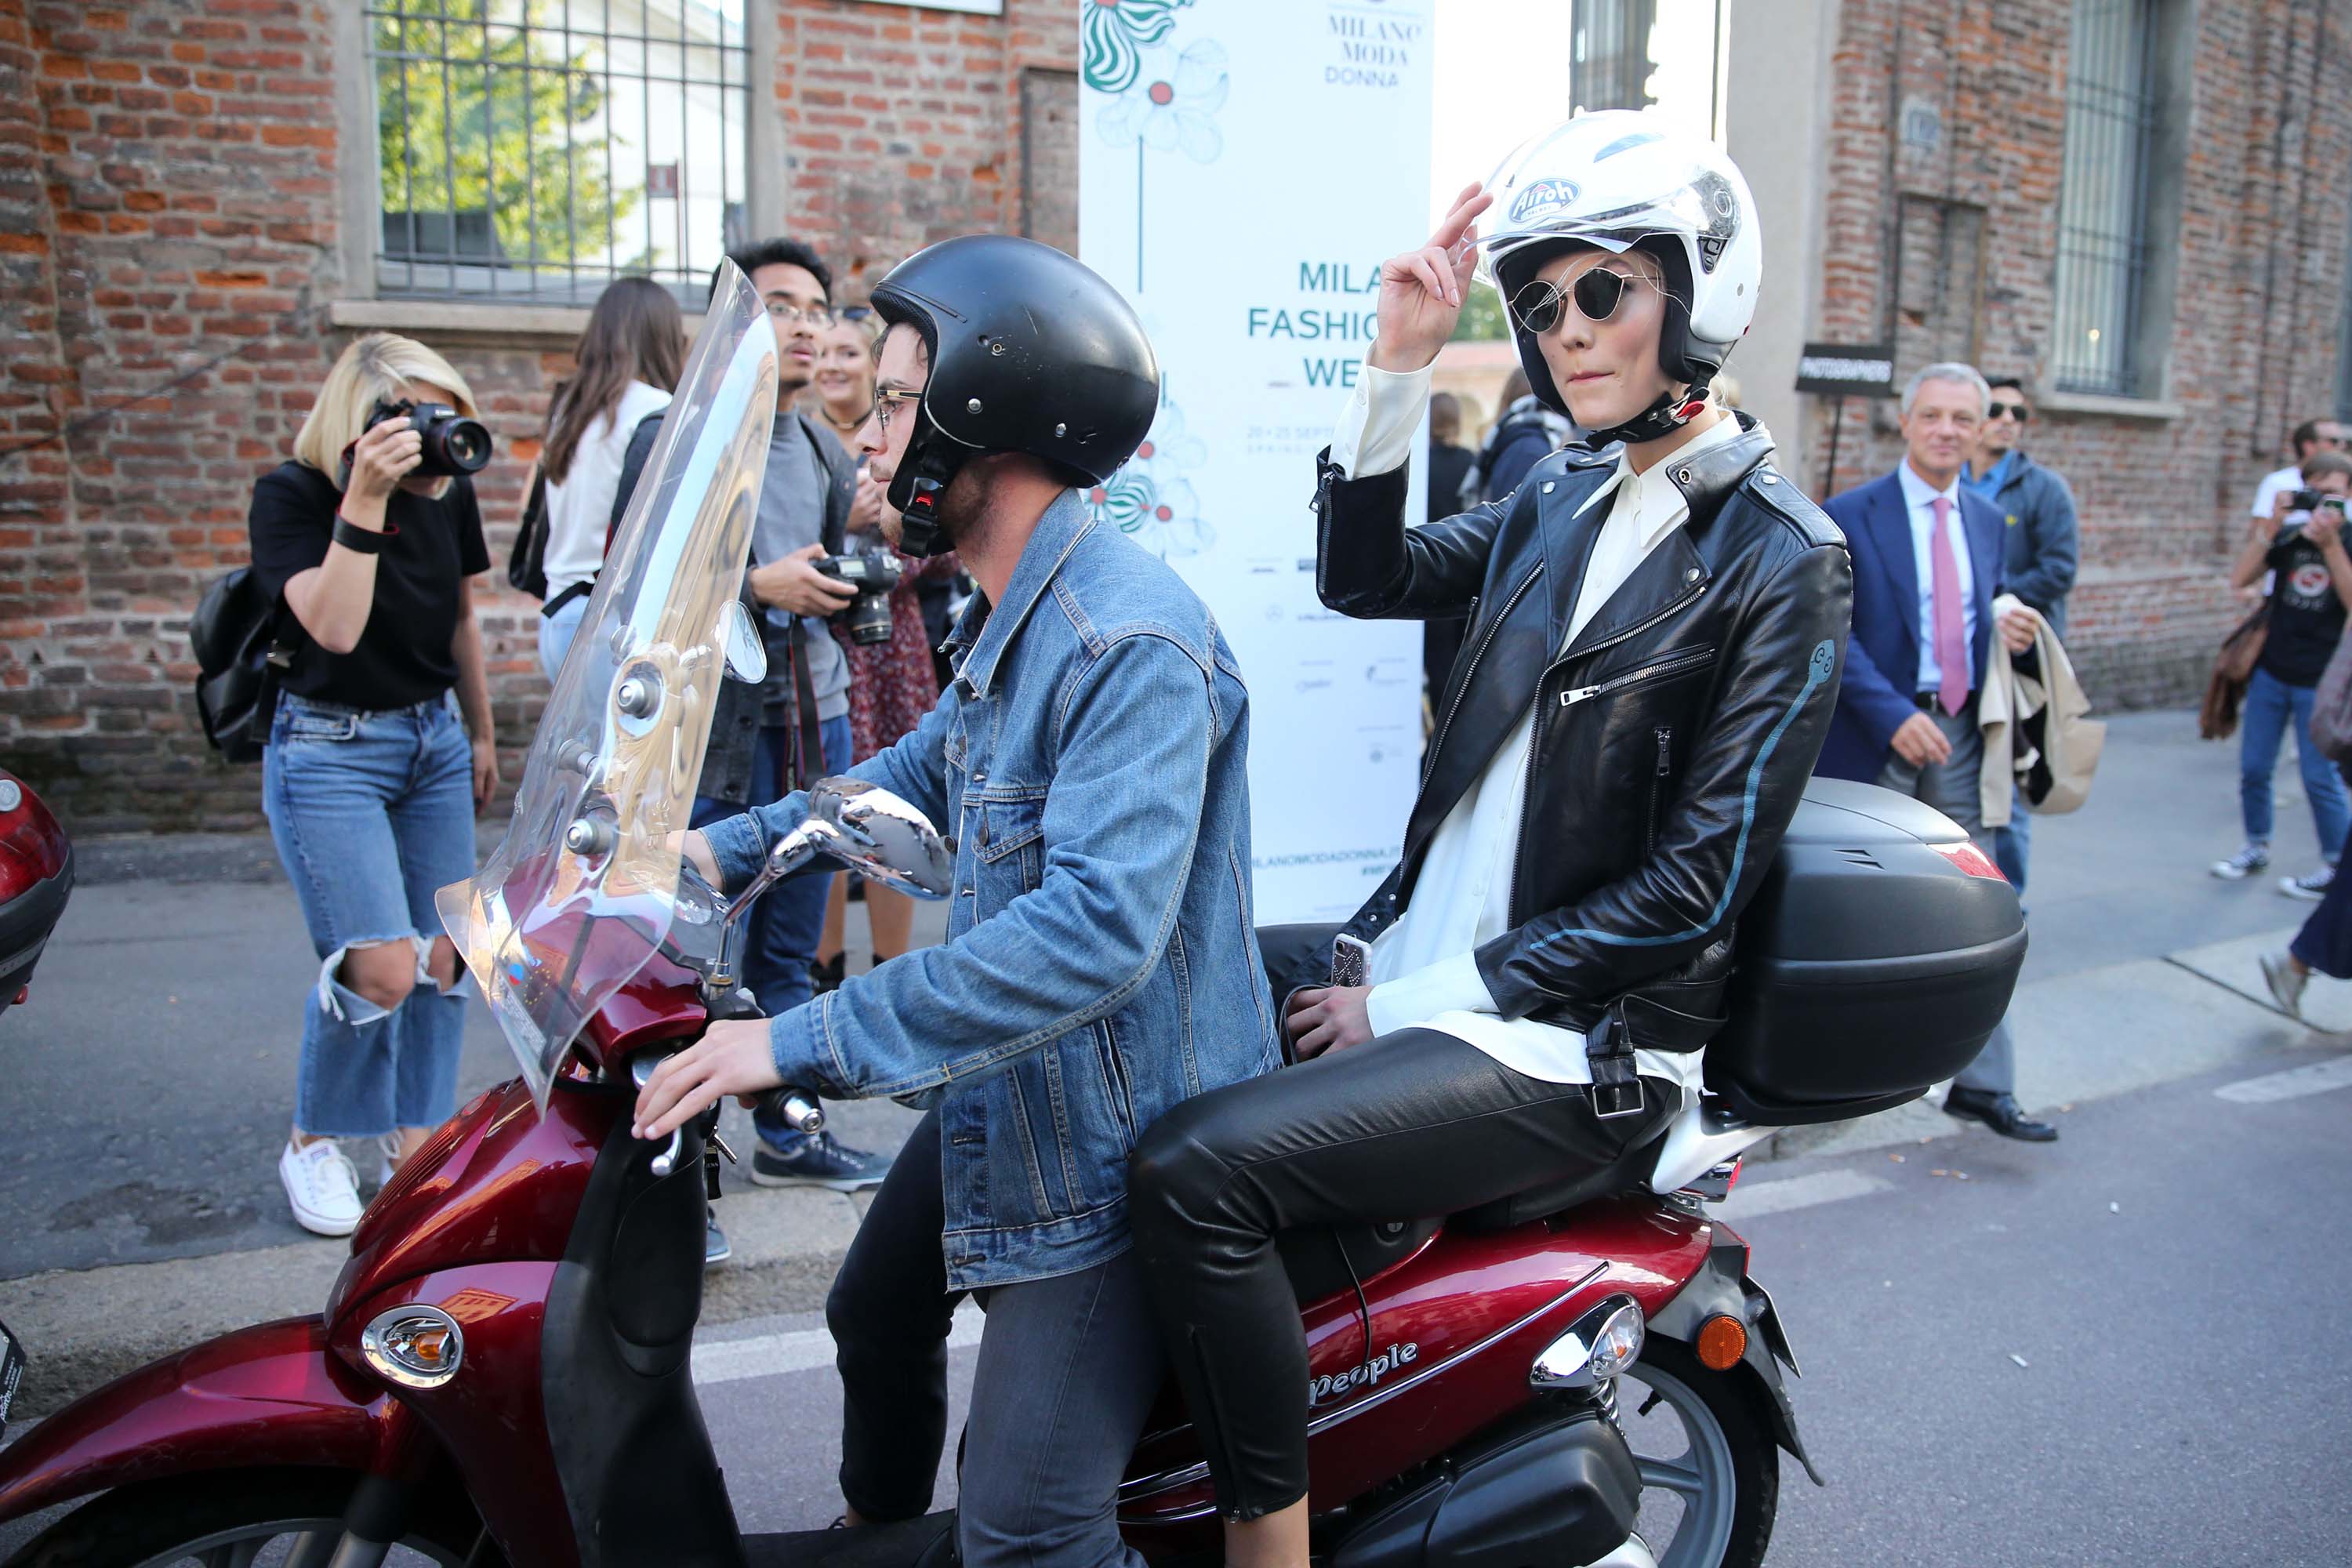 Karlie Kloss rides off on a motorcycle after walking the runway in Milan